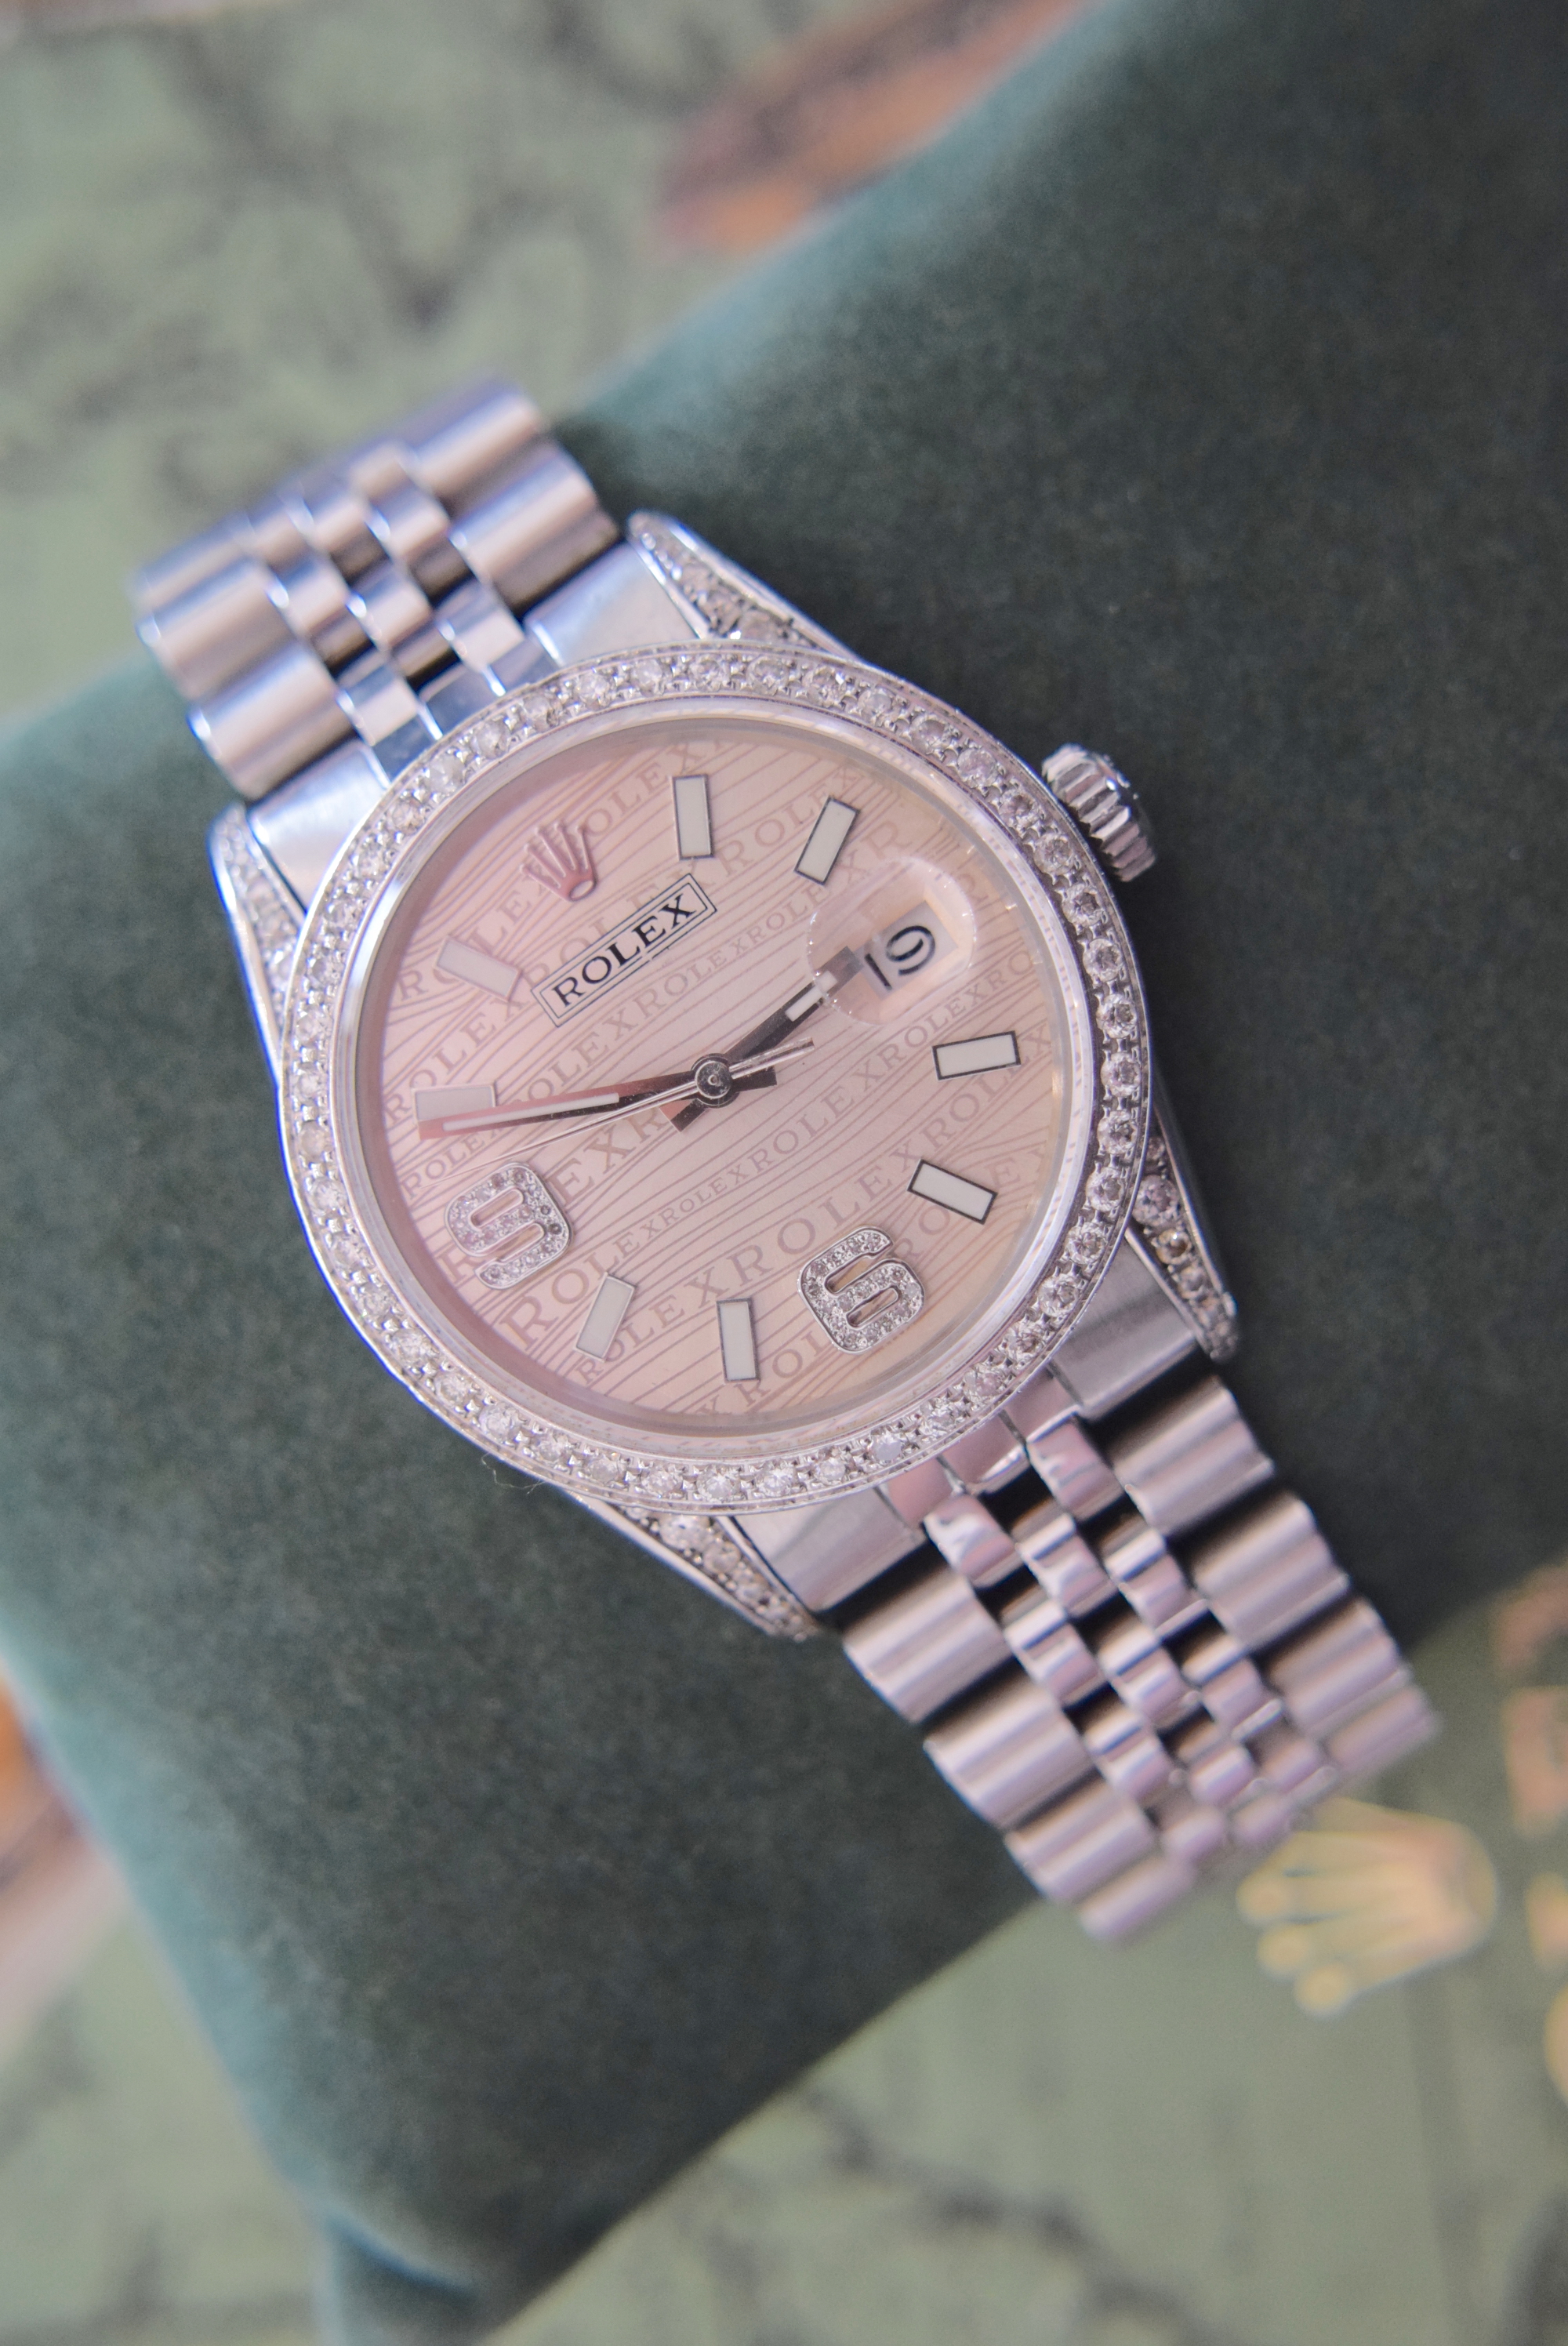 ROLEX DATEJUST REF. 16030 36MM - SILVER/ SALMON ROLEX WAVE DESIGN DIAL WITH 6,9 DIAMOND MOTIFS - Image 3 of 11